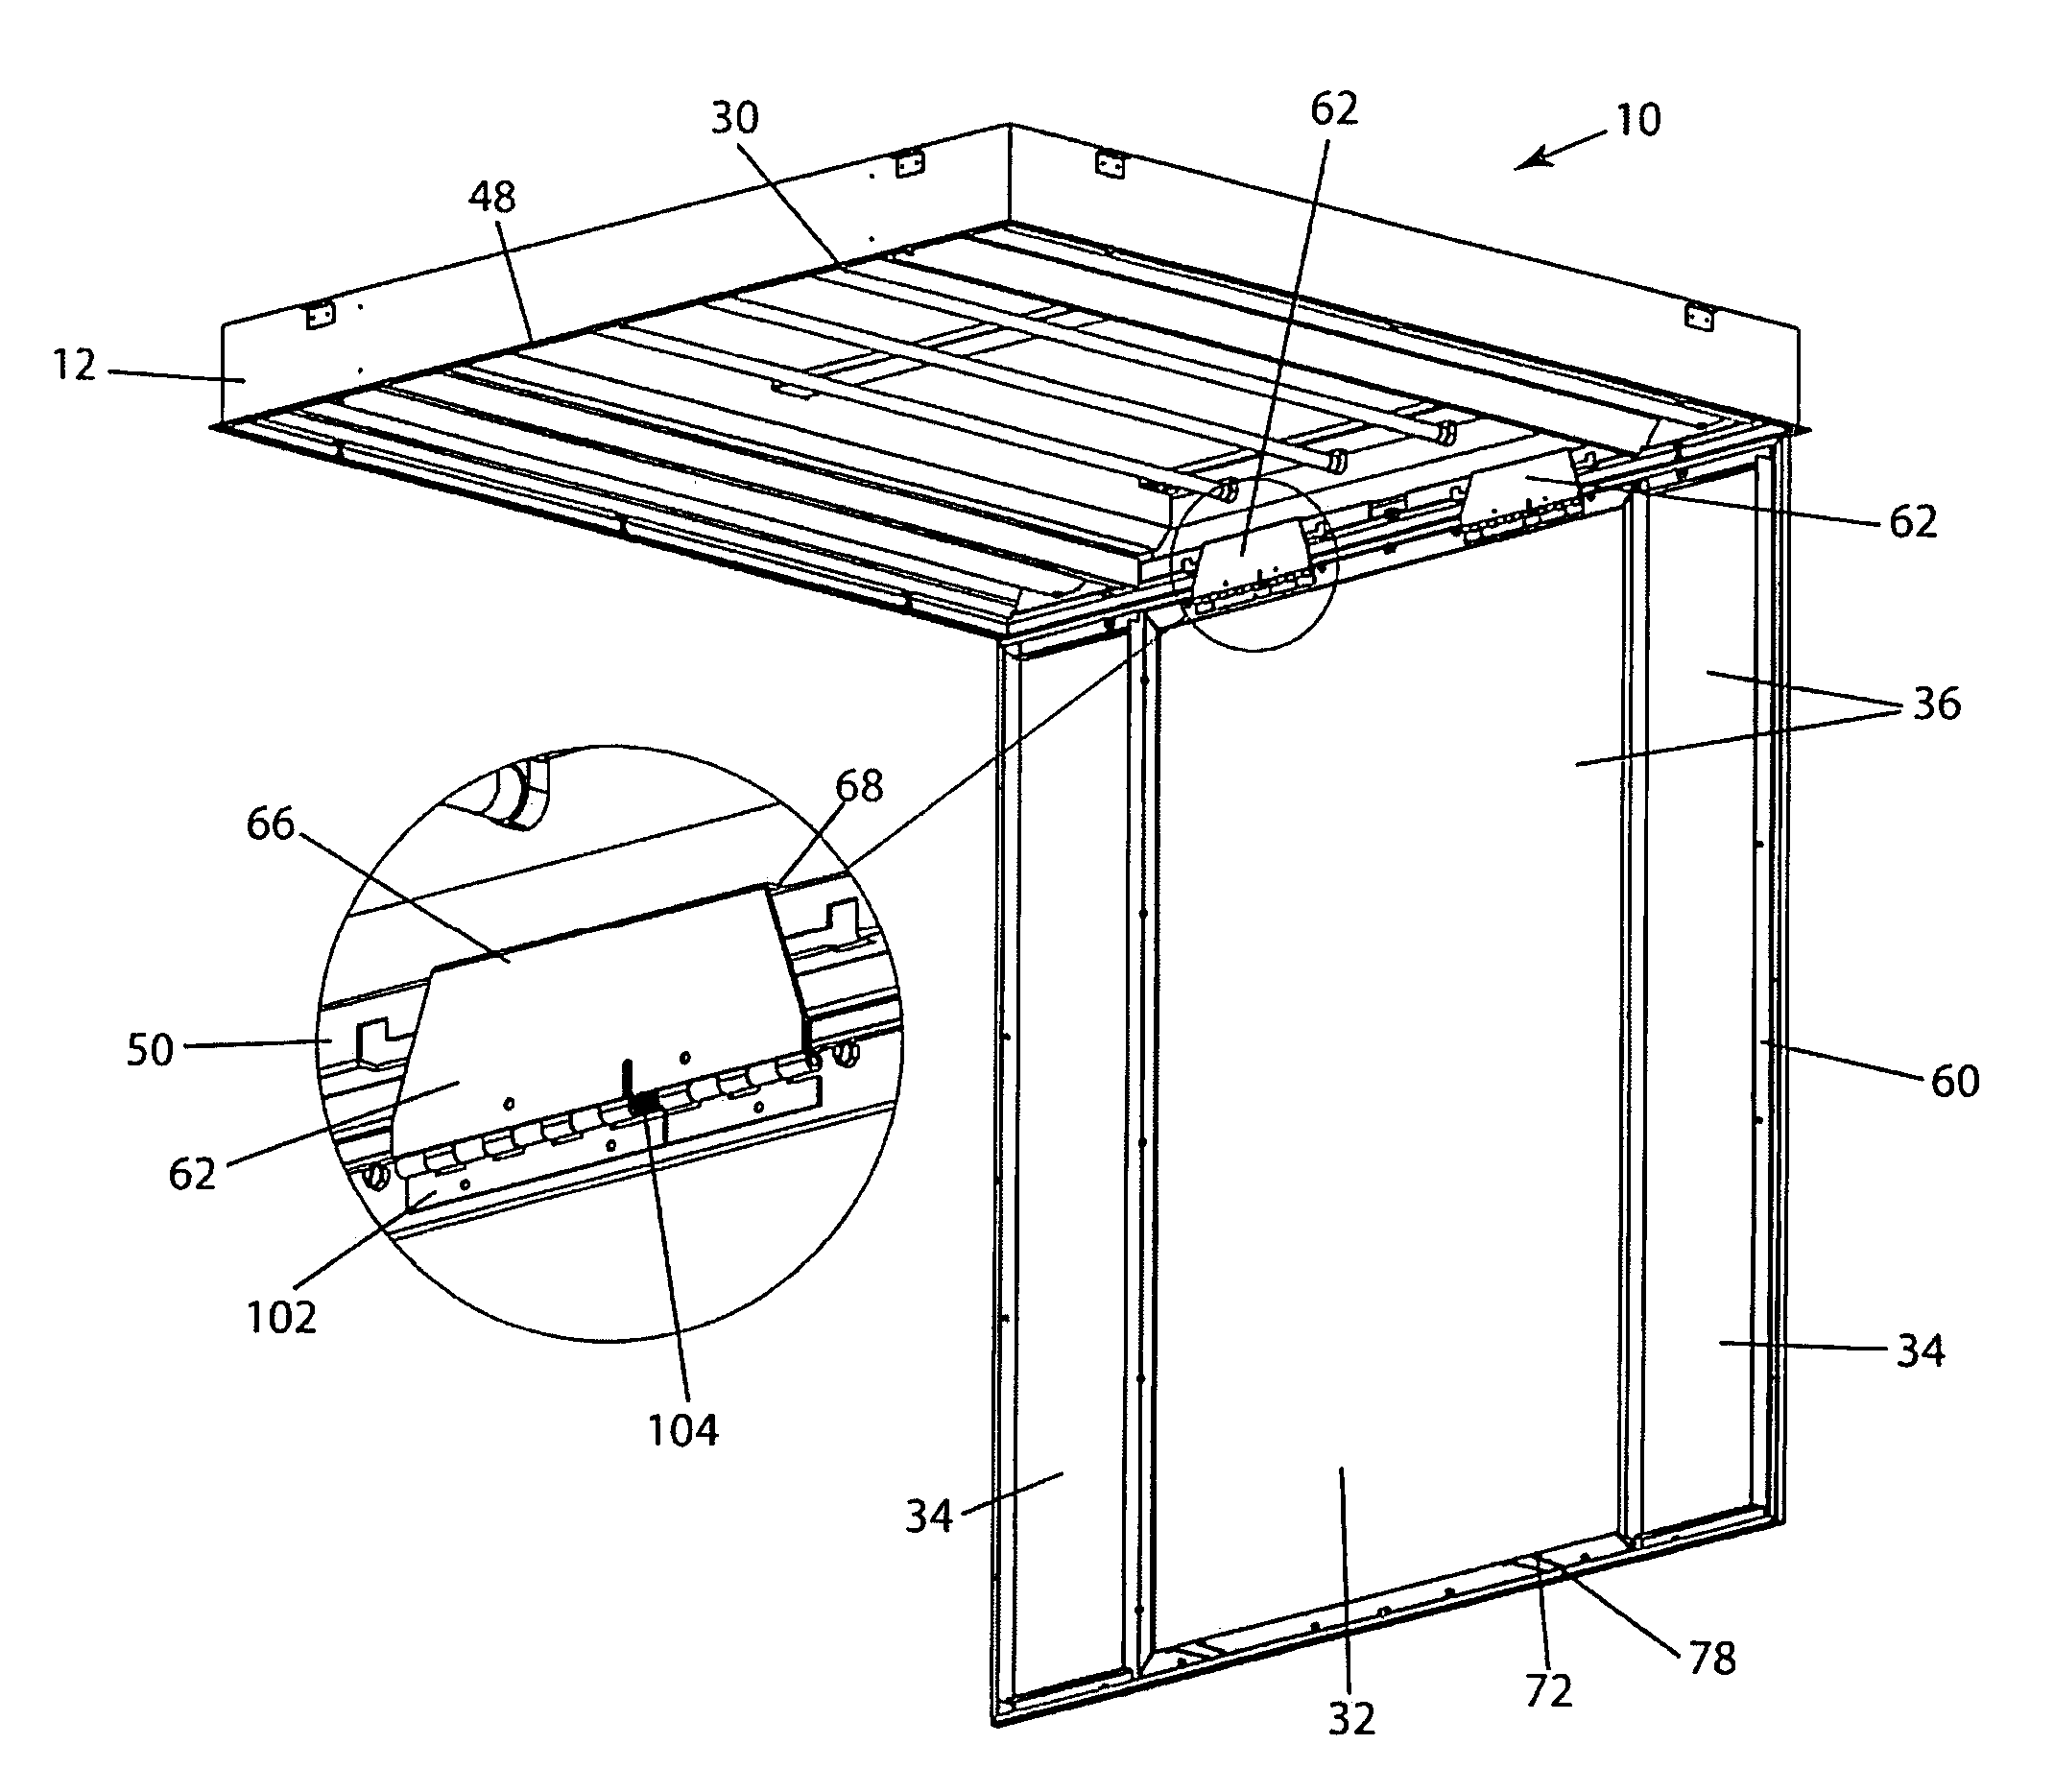 Ceiling-Mounted Troffer-Type Light Fixture